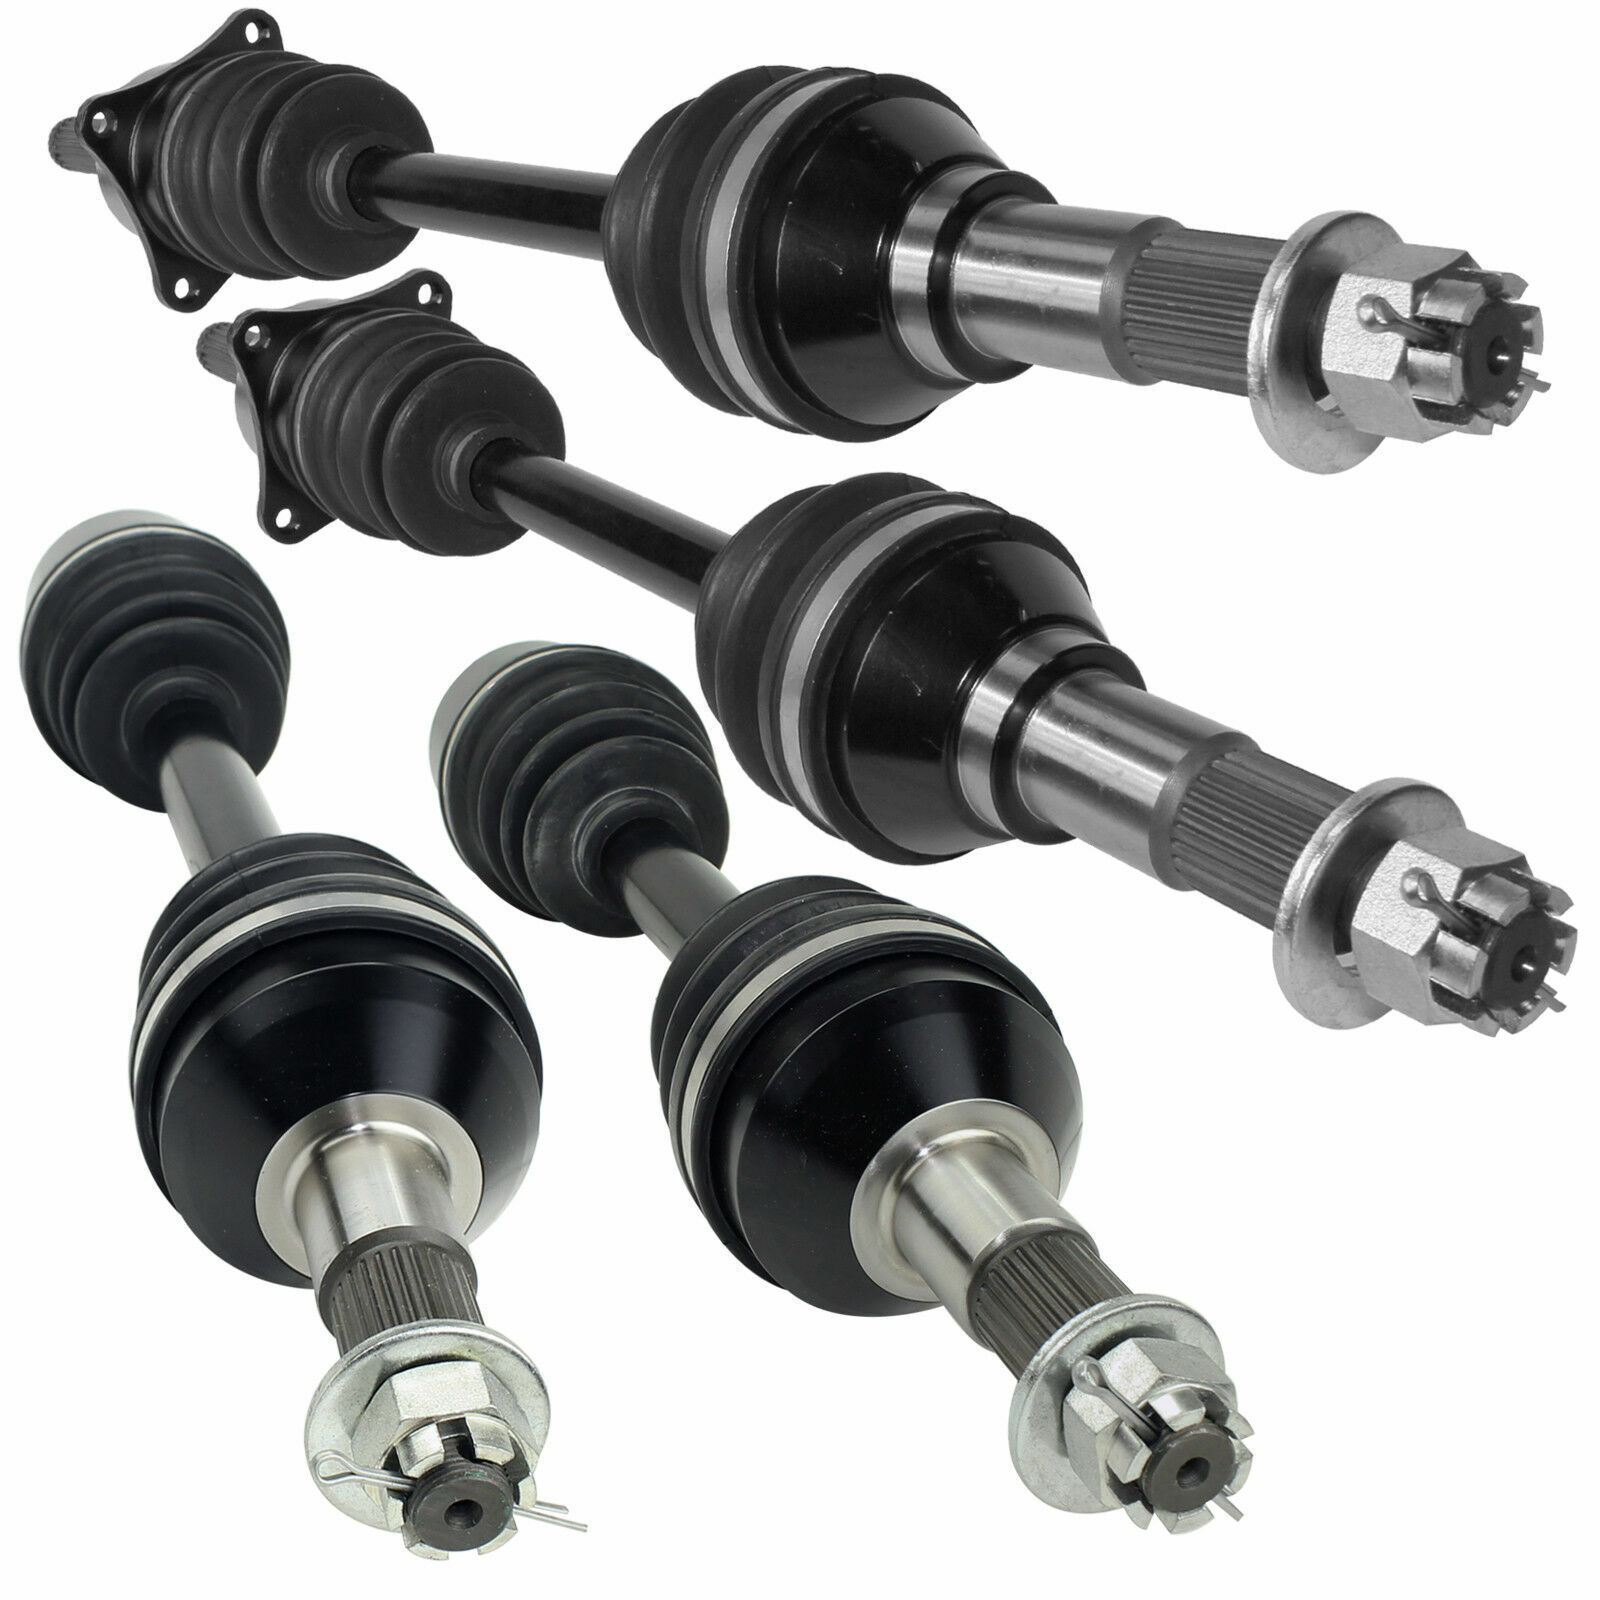 Front Rear Left Right CV Joint Axles for Can-Am Outlander 800R 4X4 EFI 2009-12